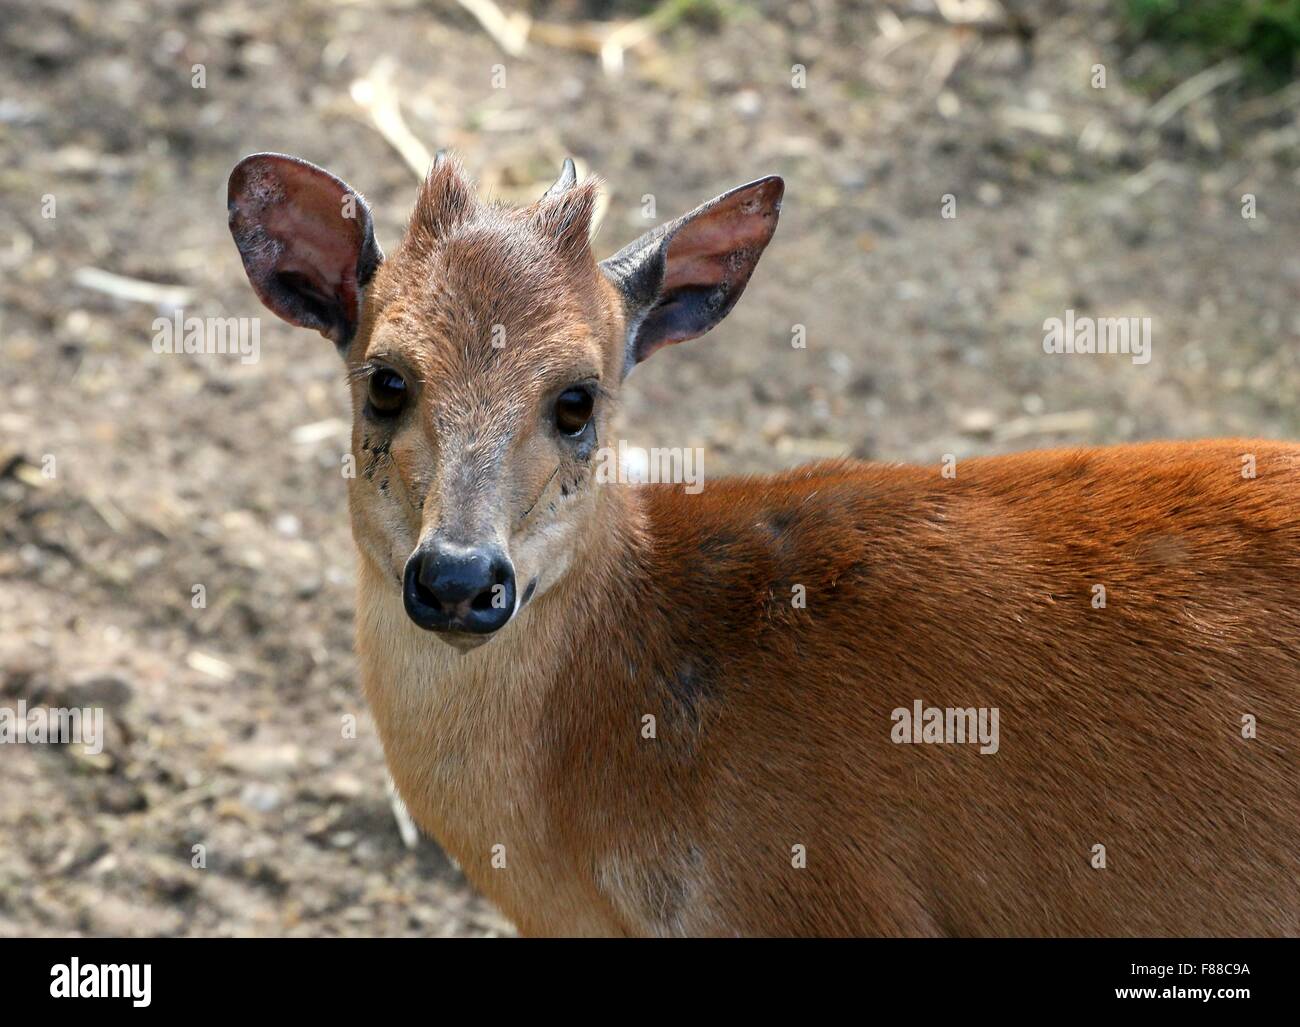 Red forest duiker or Natal duiker antelope (Cephalophus natalensis), native to Southern and Eastern Africa Stock Photo